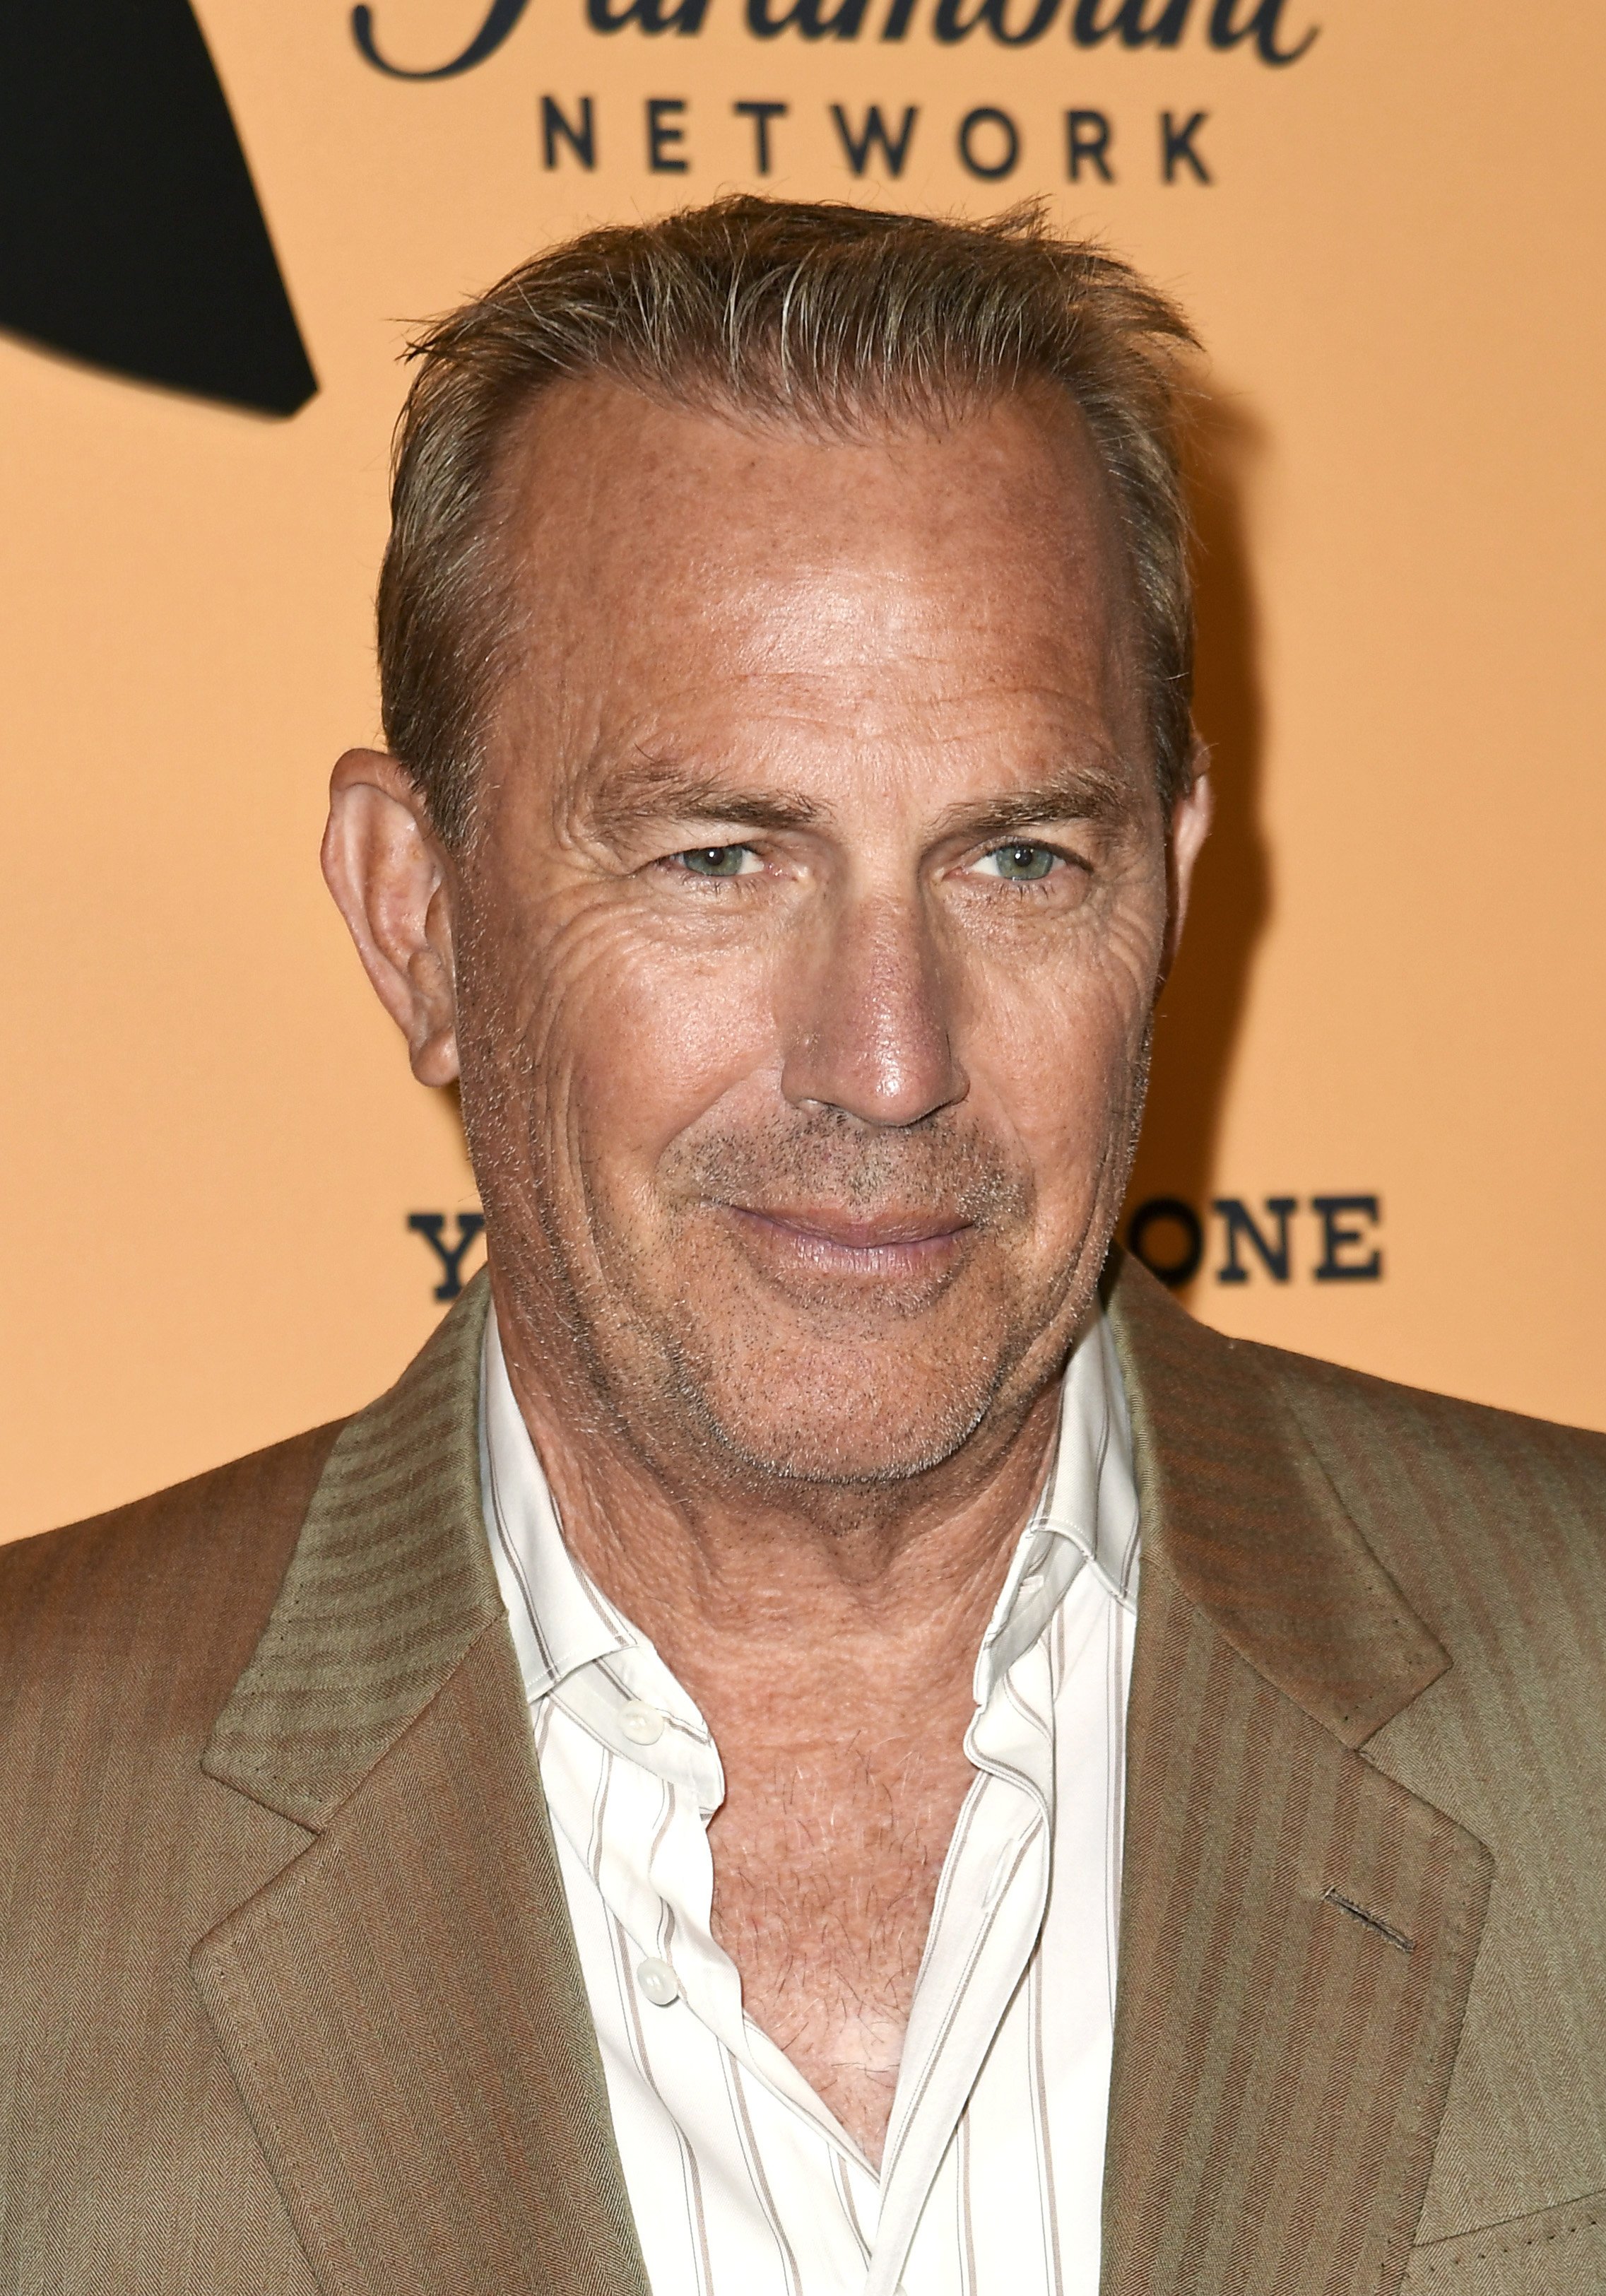 Kevin Costner during Paramount Network's "Yellowstone" Season 2 Premiere Party at Lombardi House on May 30, 2019, in Los Angeles, California. | Source: Getty Images